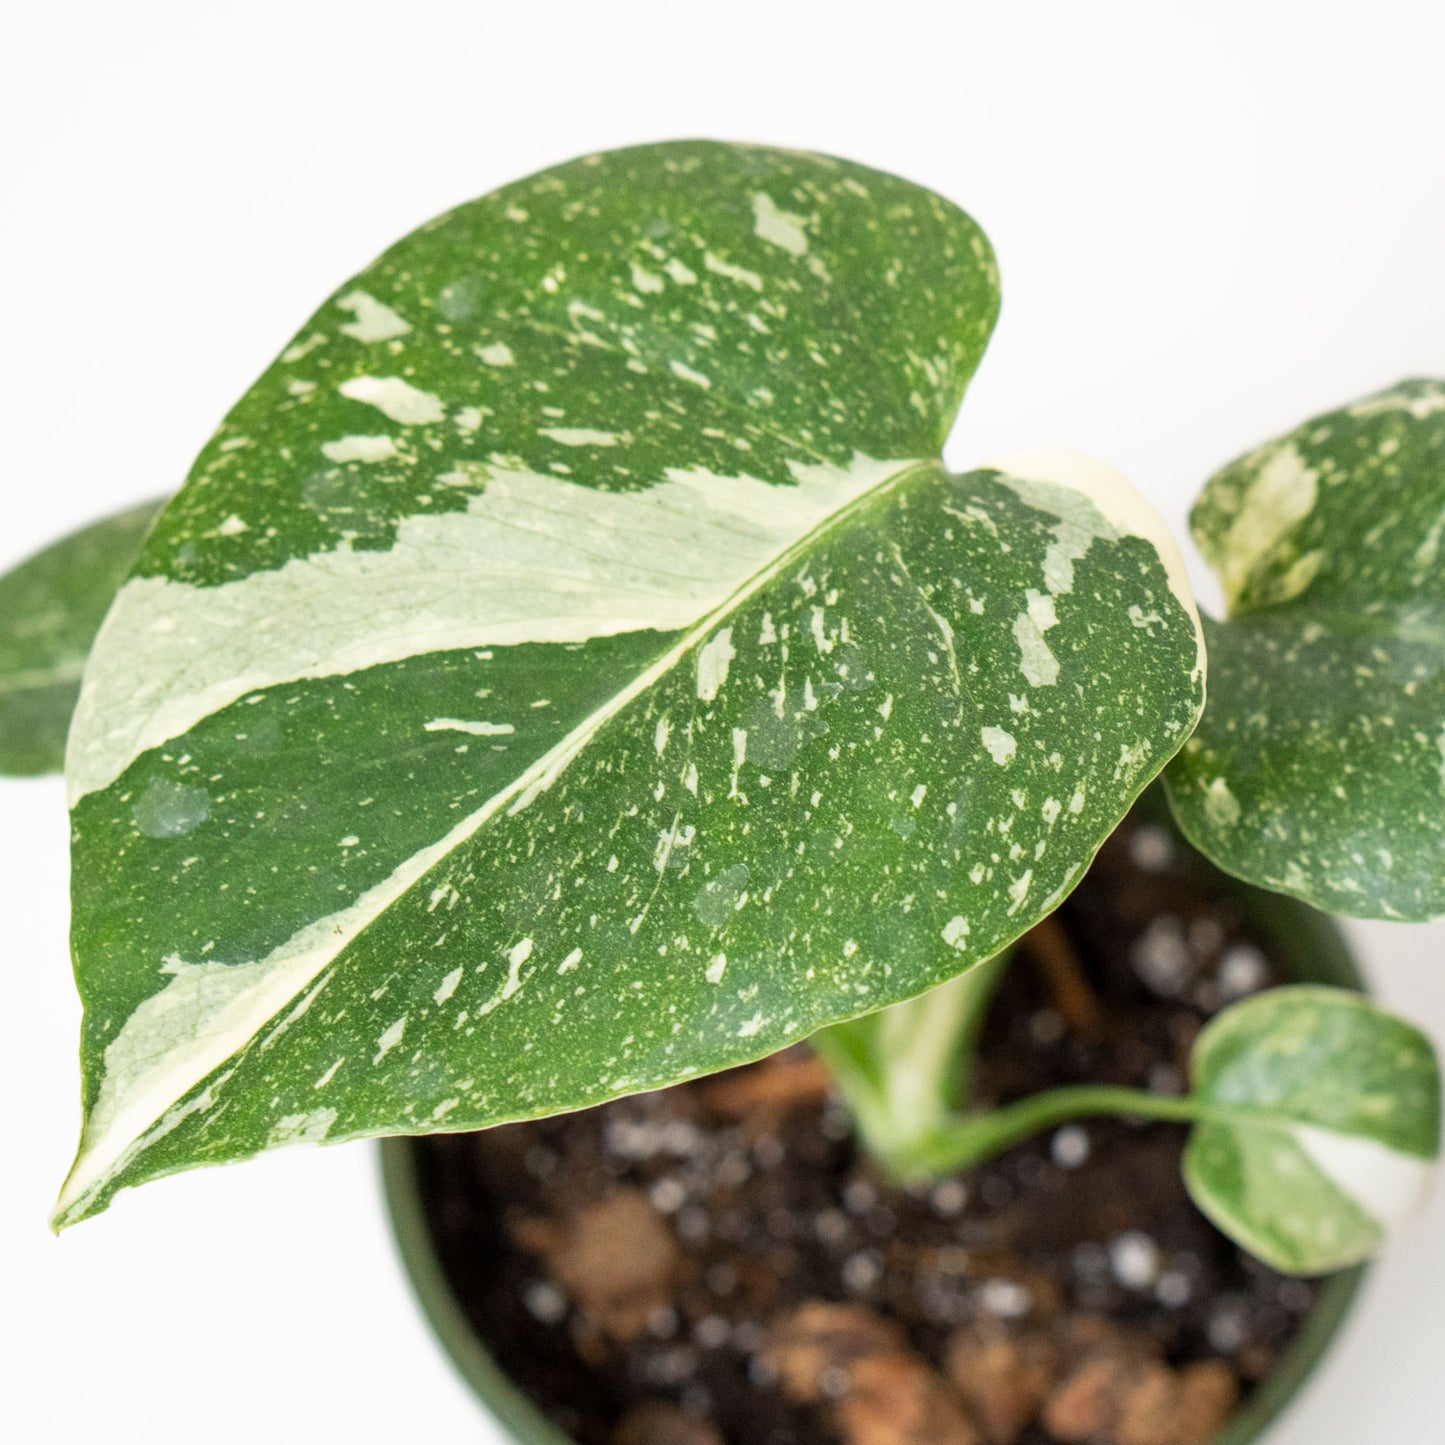 Variegated Leaves of Potted Rare Monstera Thai Constellation - Best Quality Houseplant Variegated Monstera Thai Constellation 4.5” - Buy repotted rare indoor plant Monstera Thai Constellation for delivery at Planteia